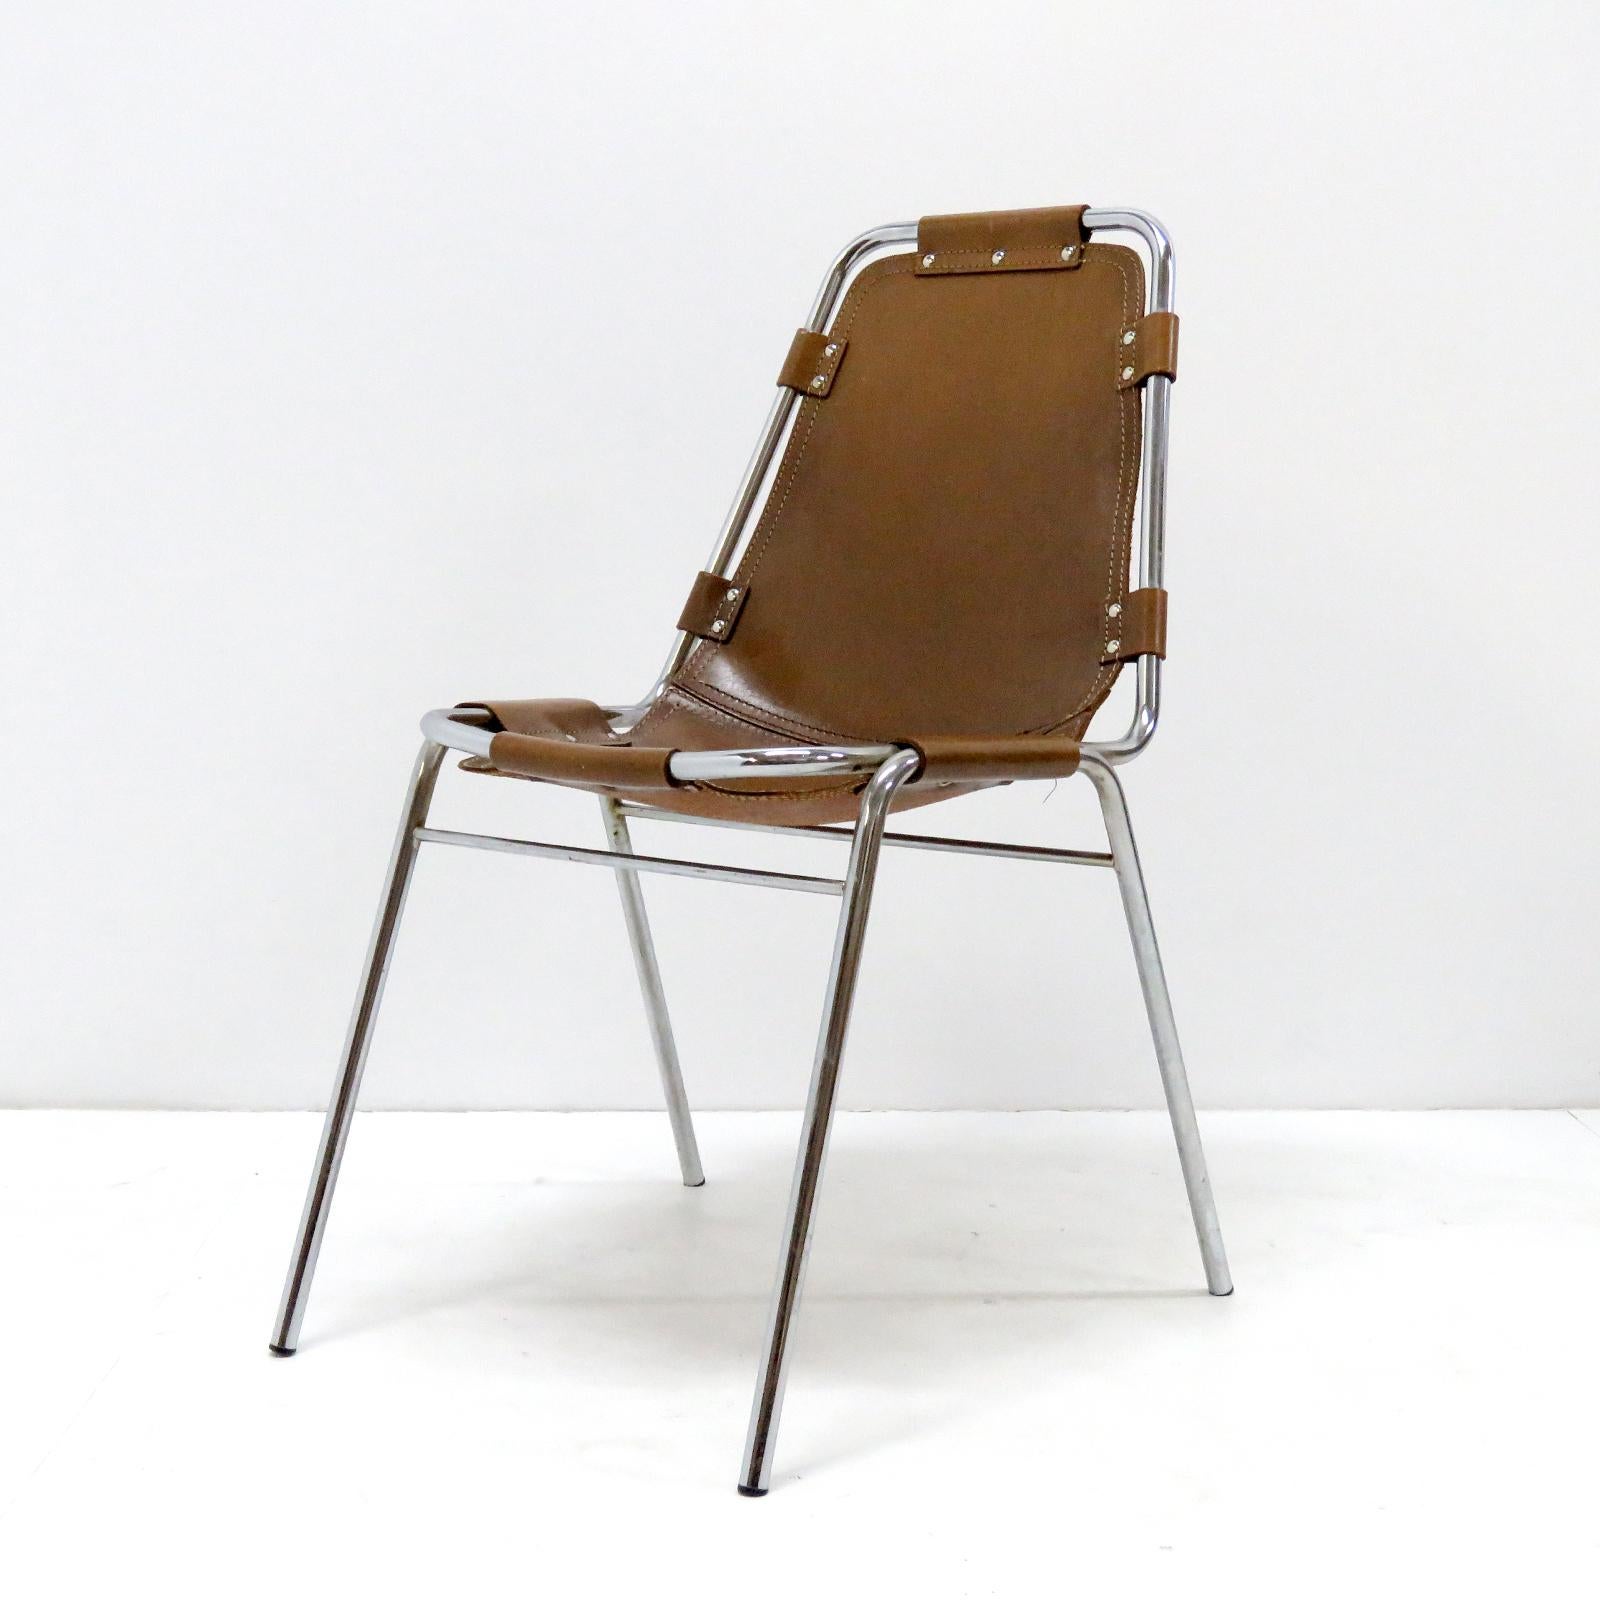 Italian “Les Arc” Chairs Selected by Charlotte Perriand